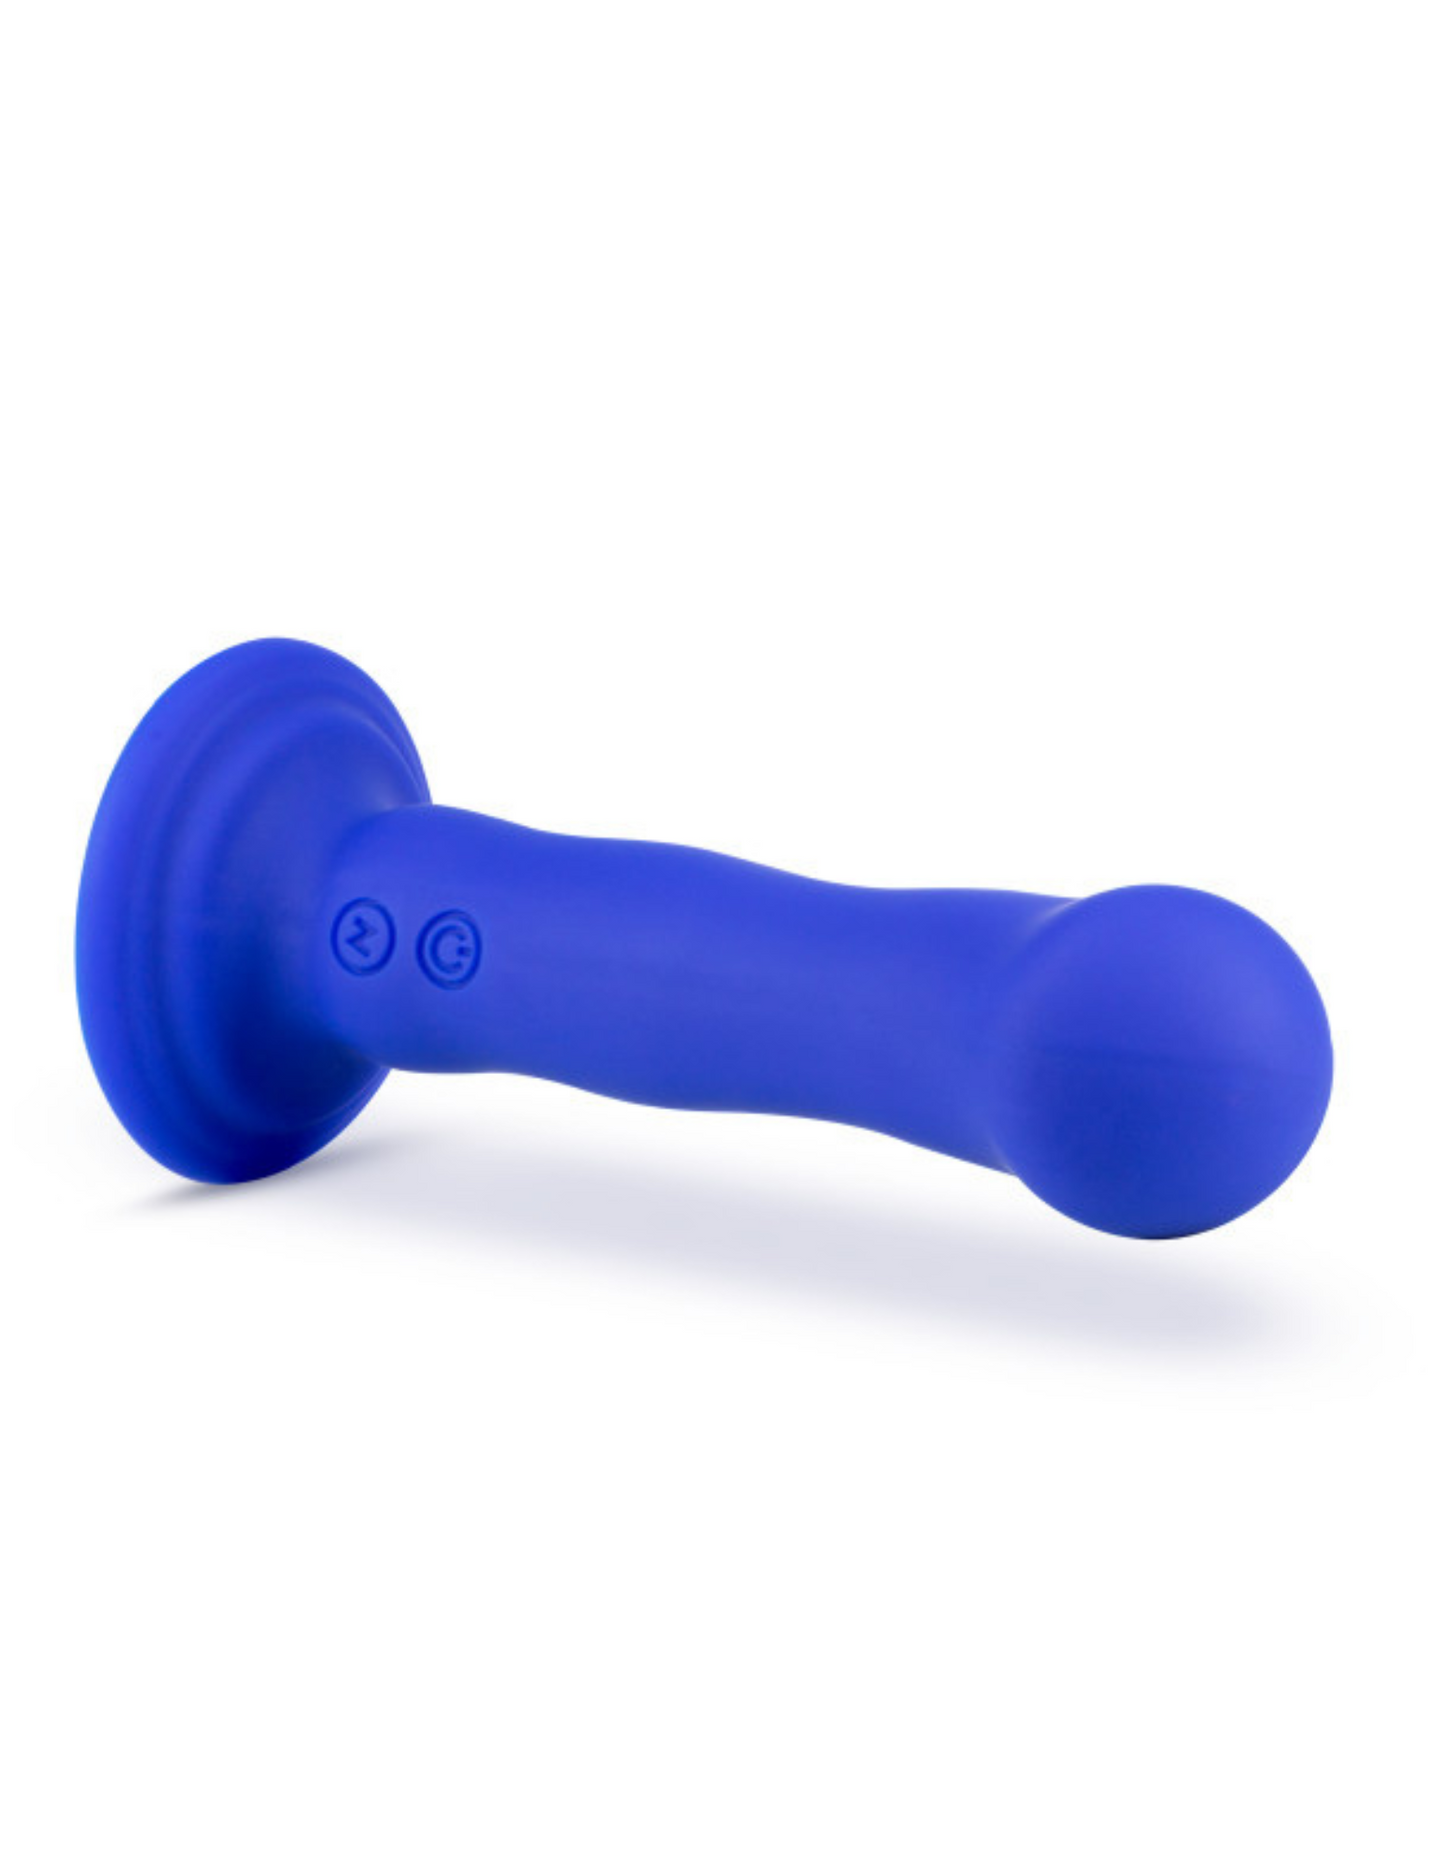 Side view of the Impressions Santorini Vibrator from Blush (blue) shows its natural contours.